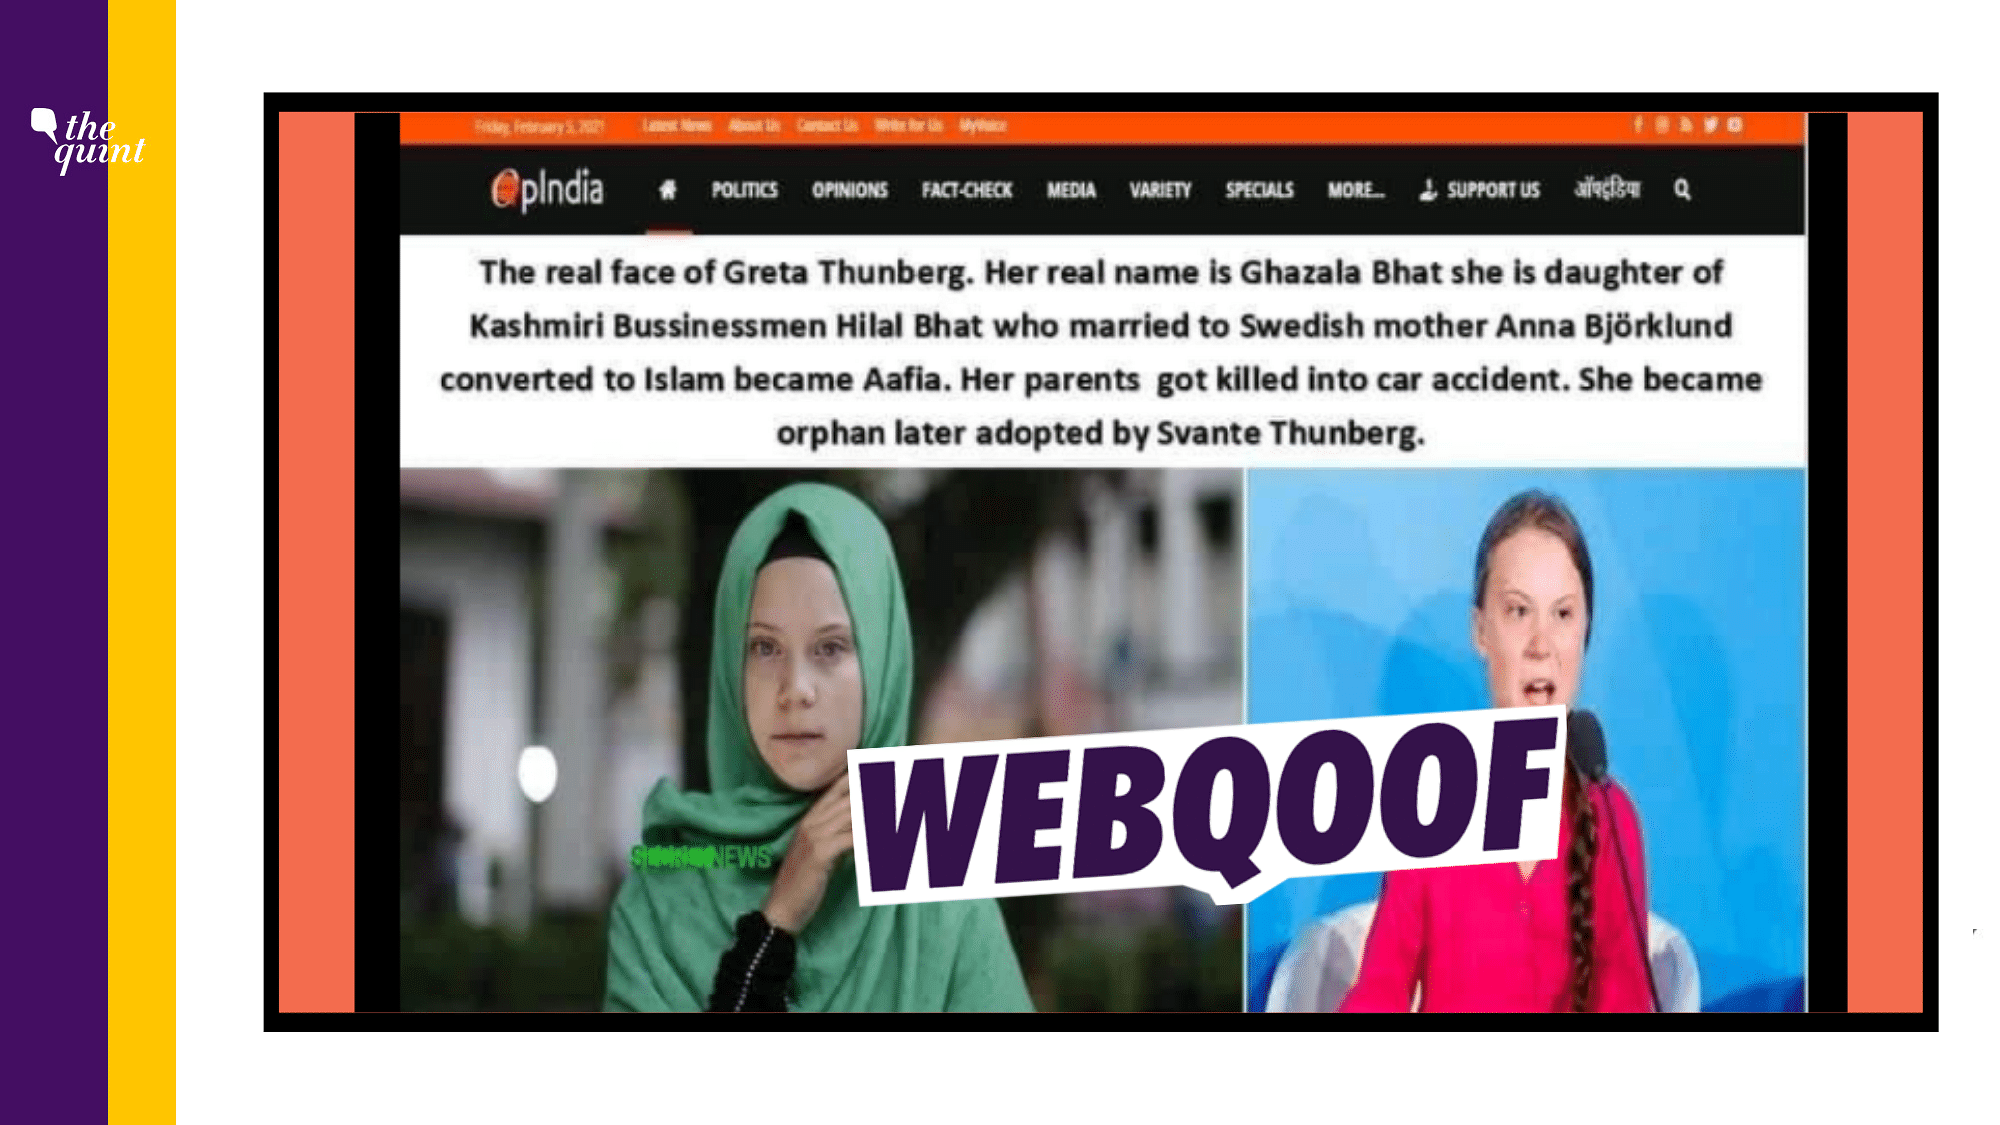 Fact-Check on Greta Thunberg | The morphed screenshot  claims that the OpIndia said that Greta Thunberg was born into a Muslim family.